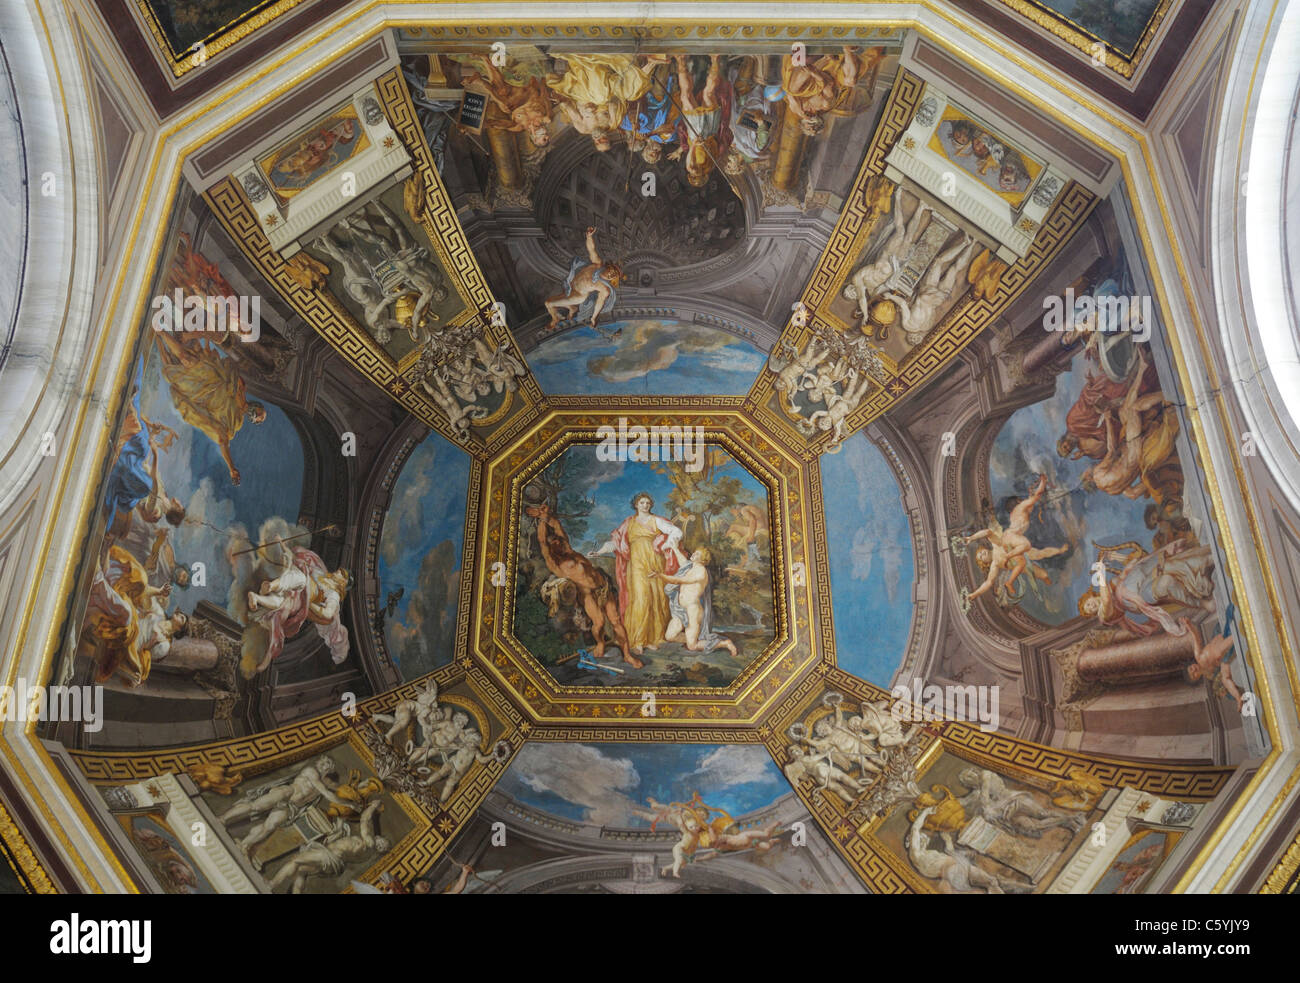 Ceiling Painting Vatican Museum Stock Photo 38101597 Alamy